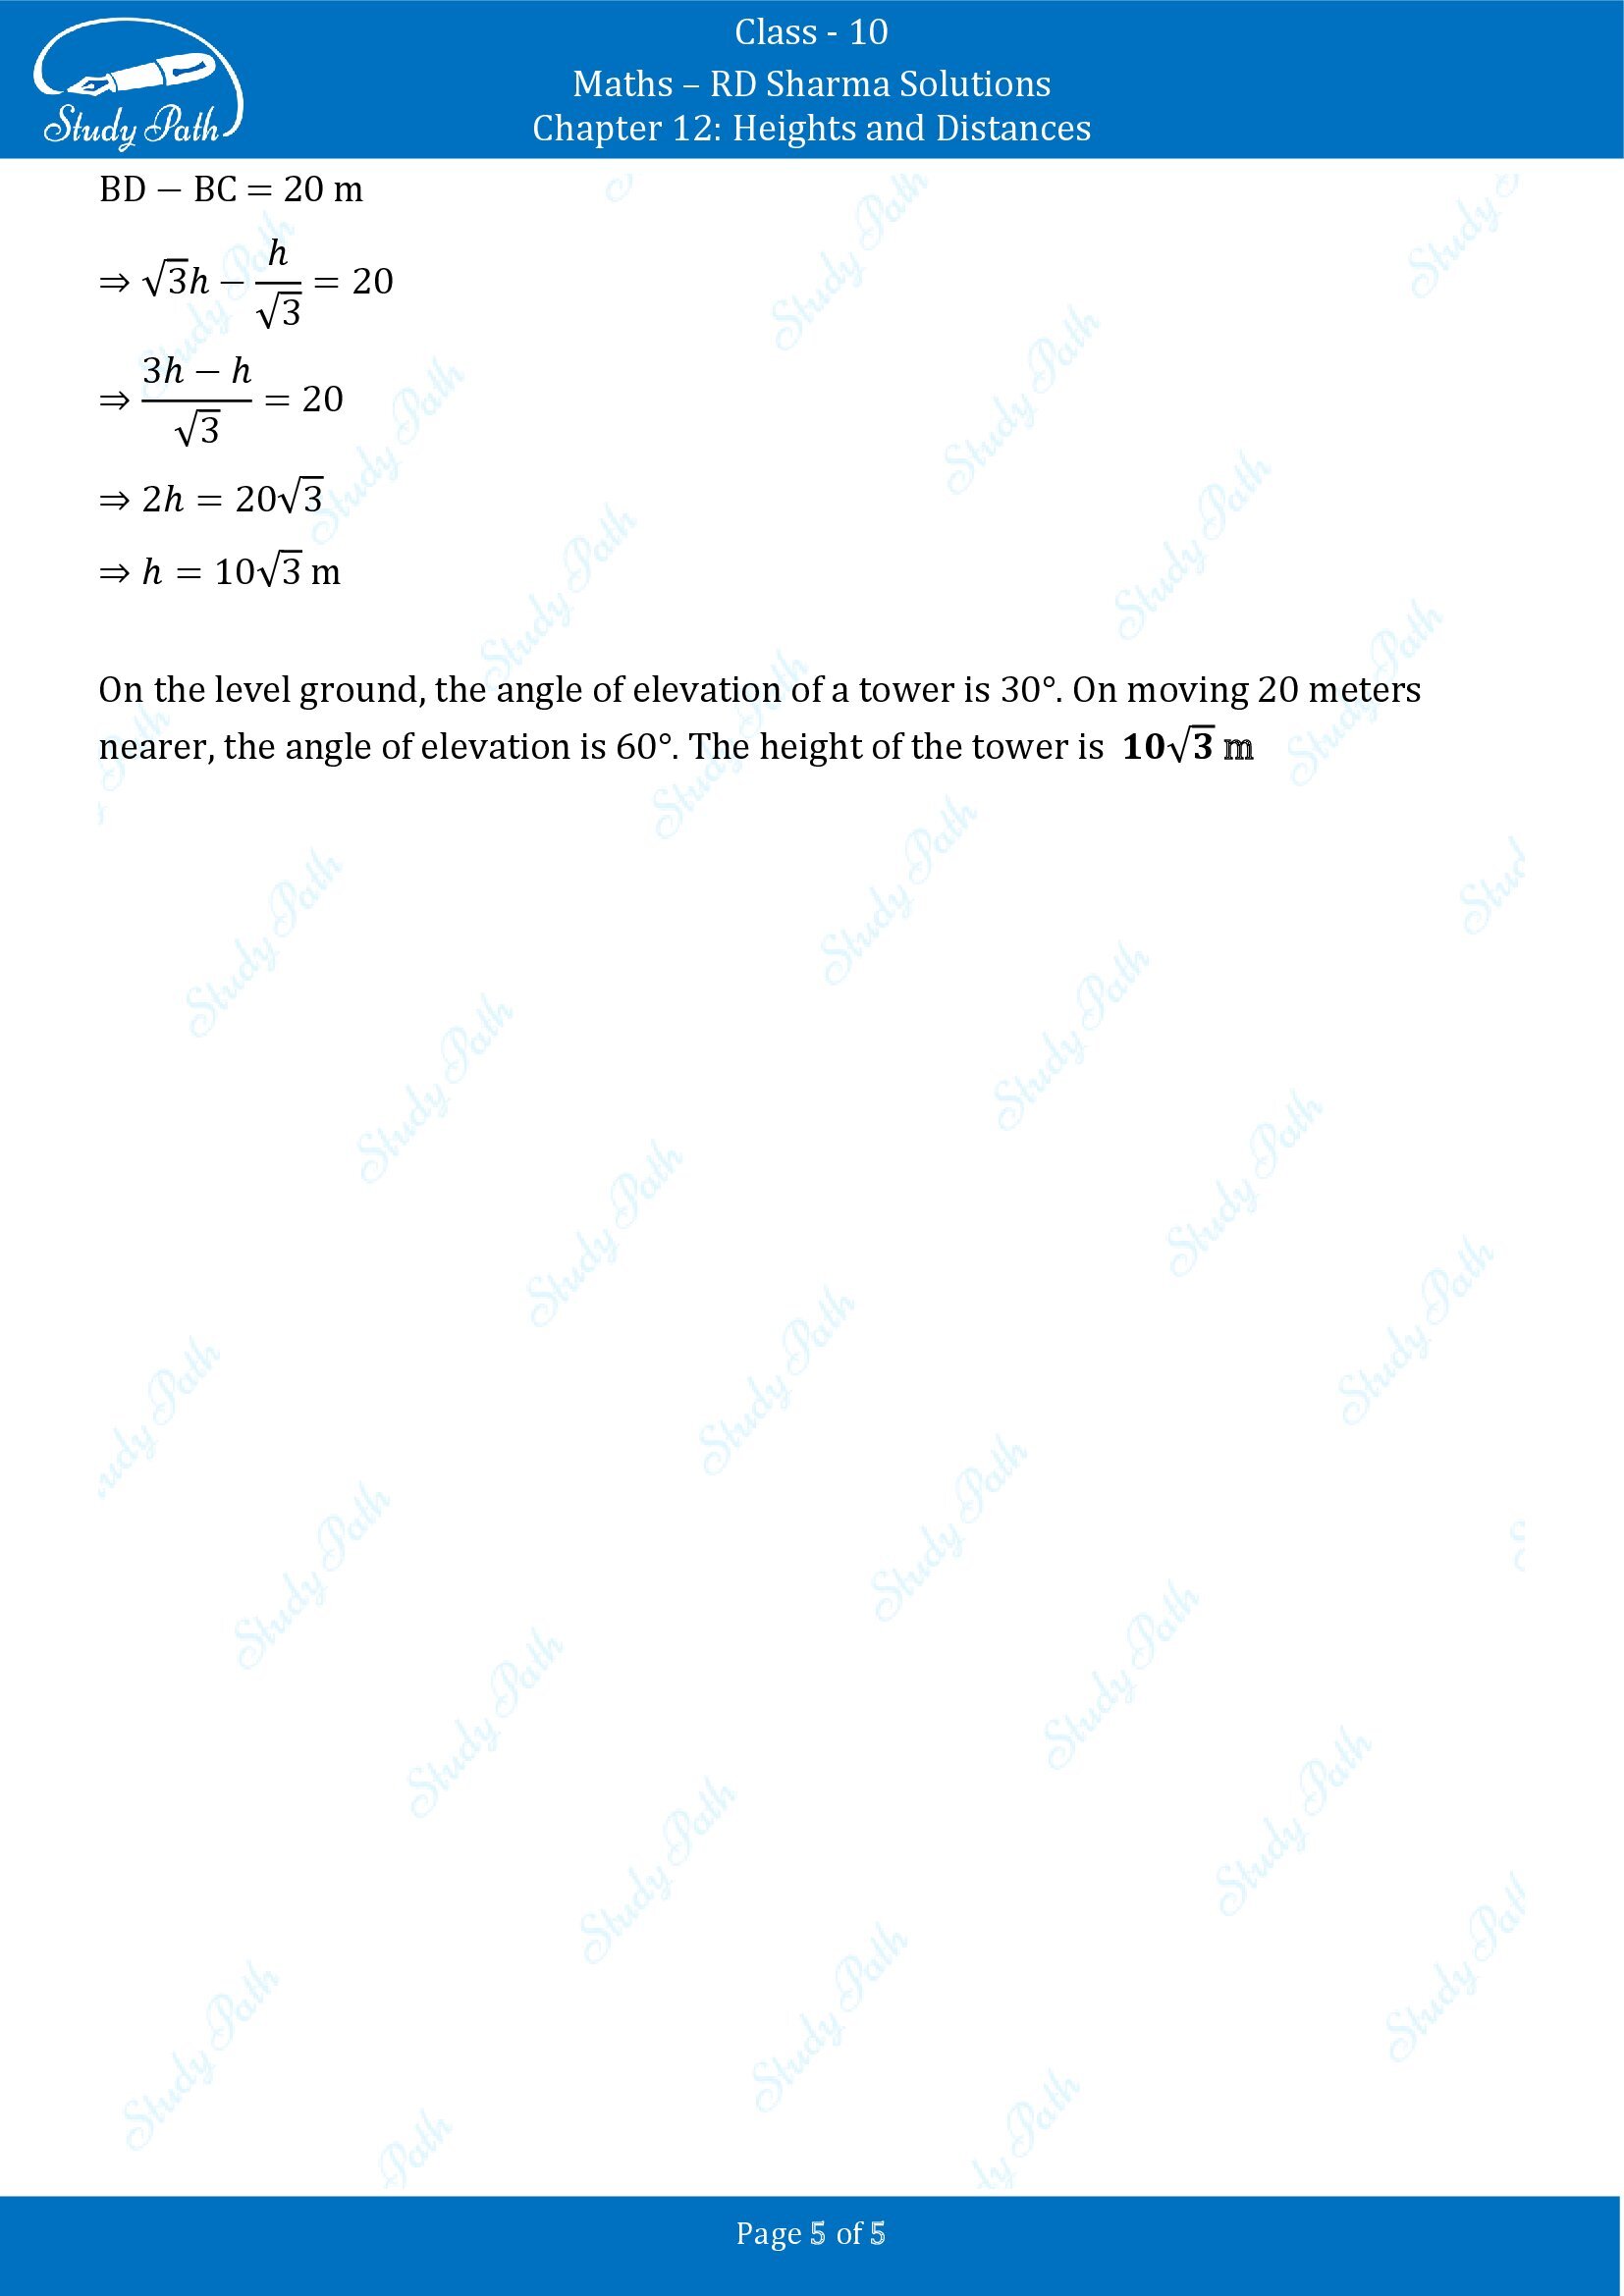 RD Sharma Solutions Class 10 Chapter 12 Heights and Distances Fill in the Blank Type Questions FBQs 00005